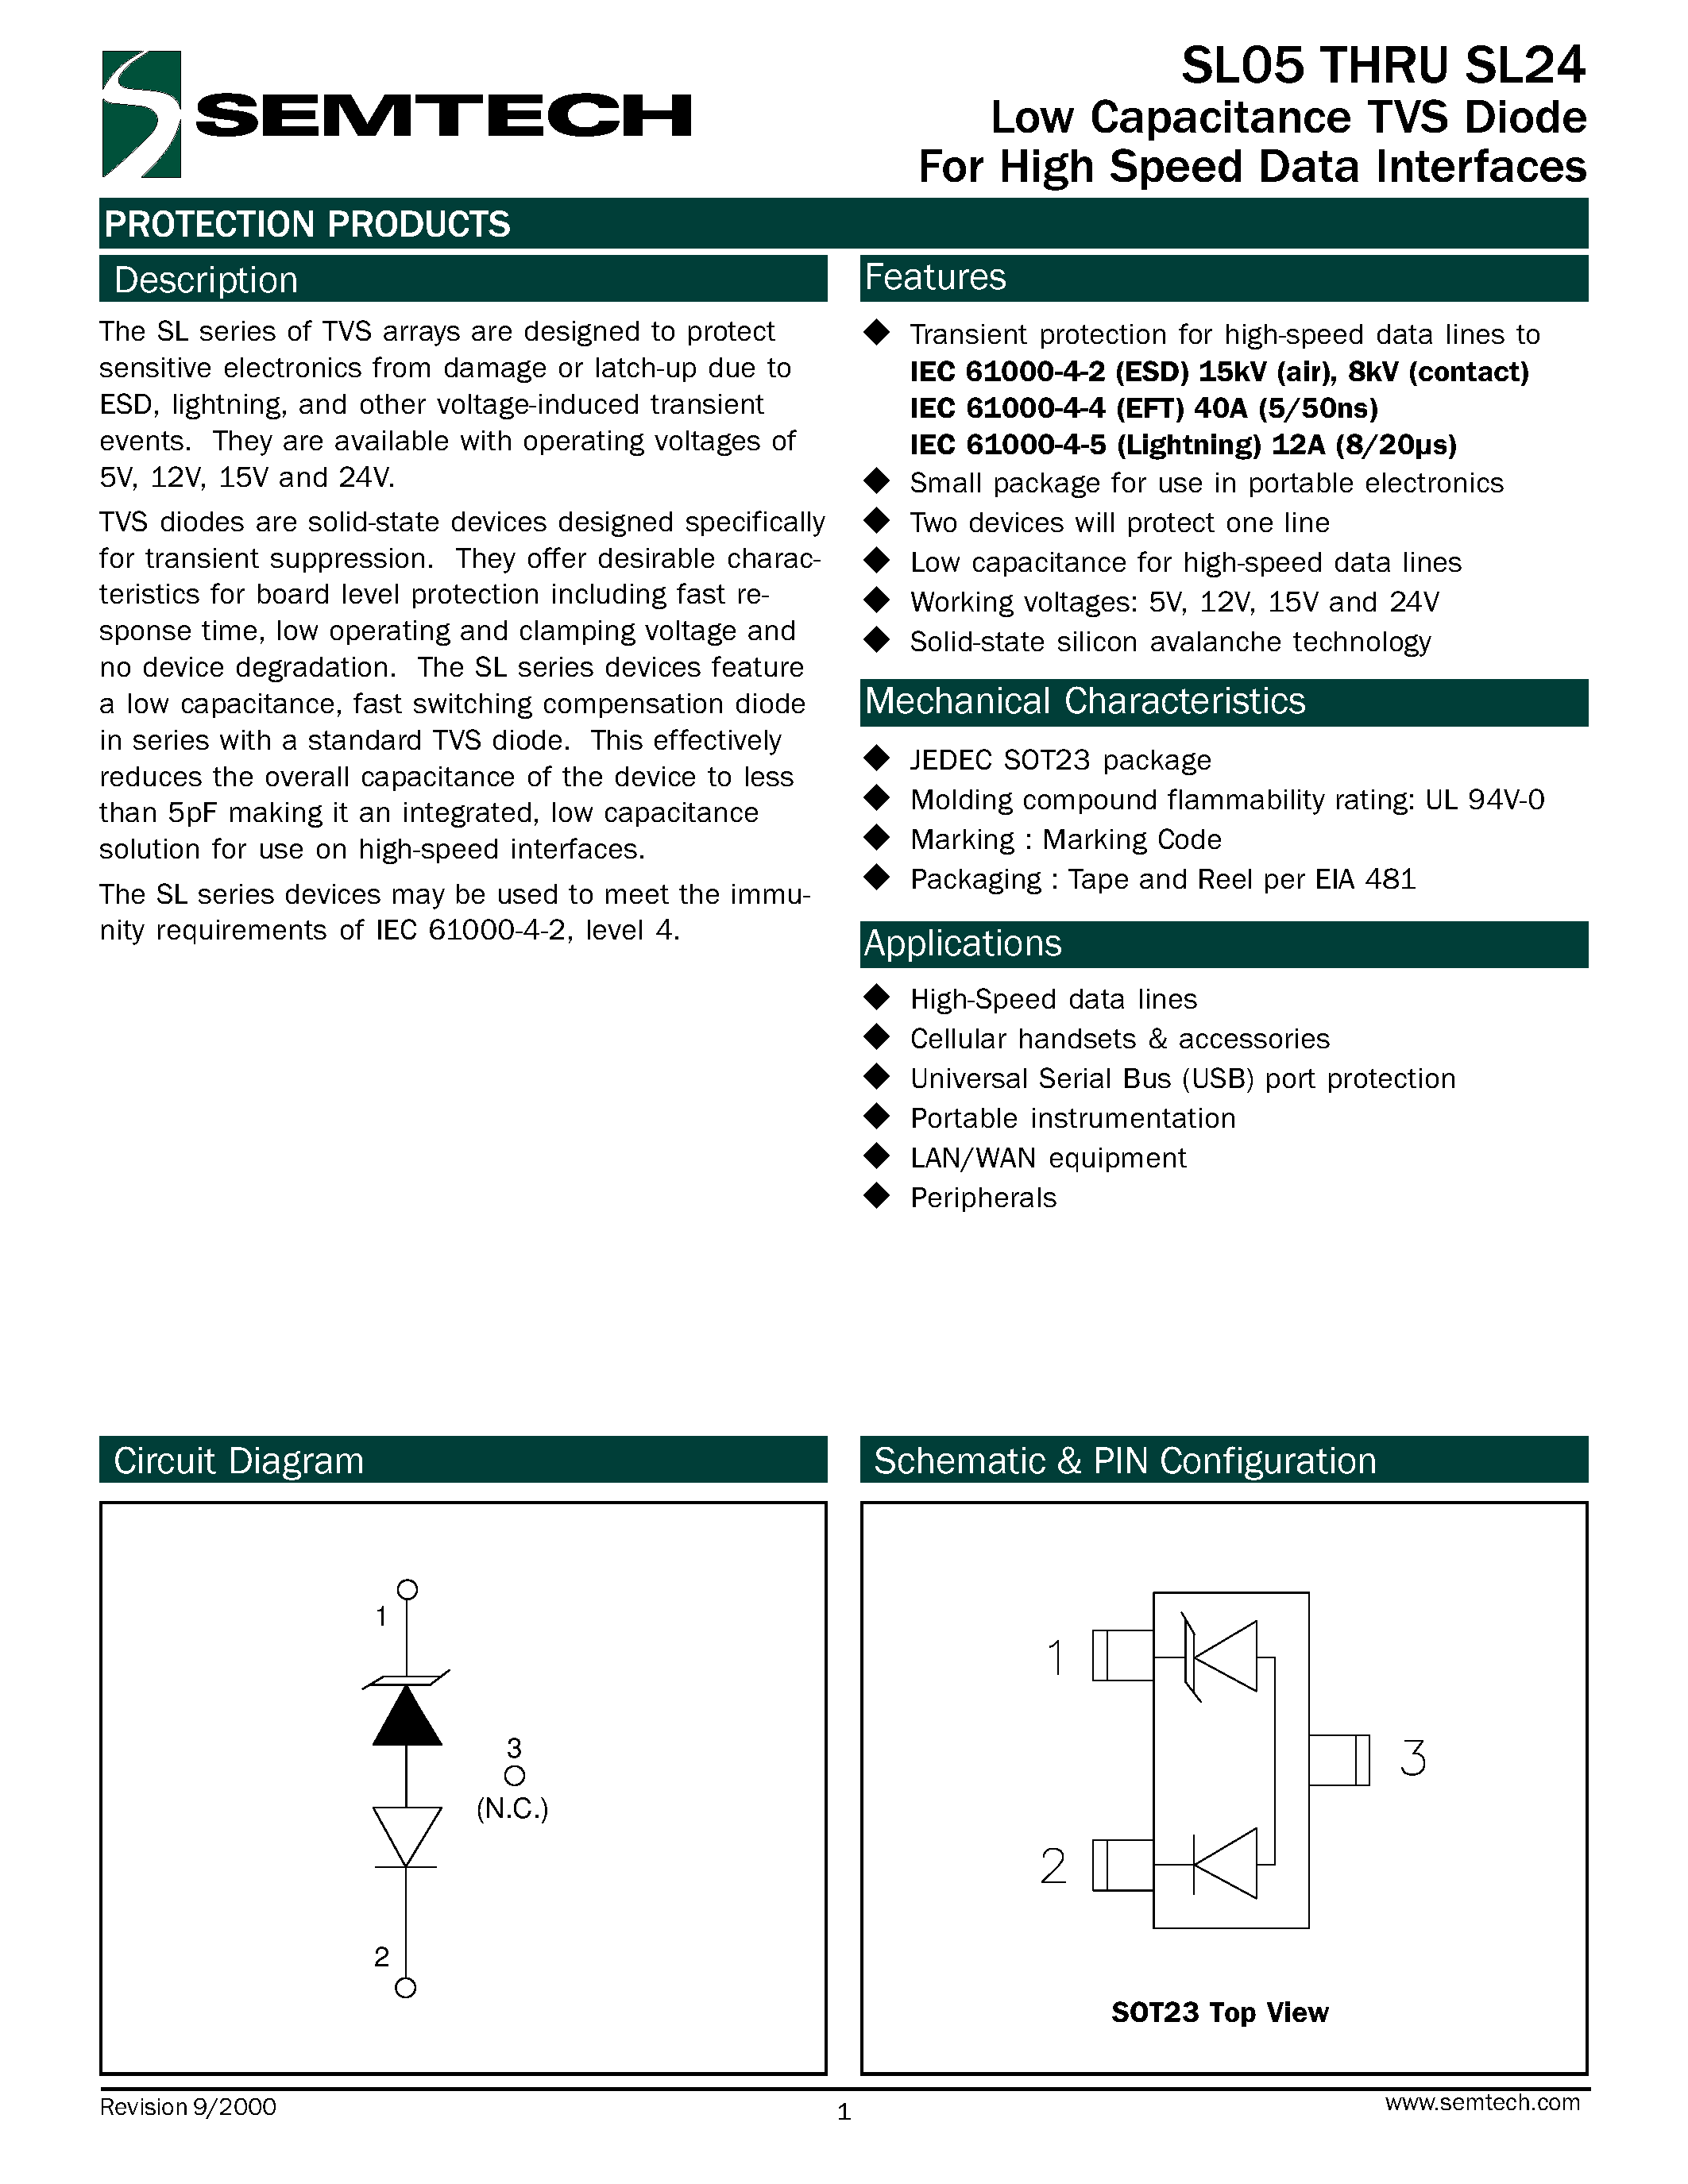 Datasheet SL24 - Low Capacitance TVS Diode For High Speed Data Interfaces page 1